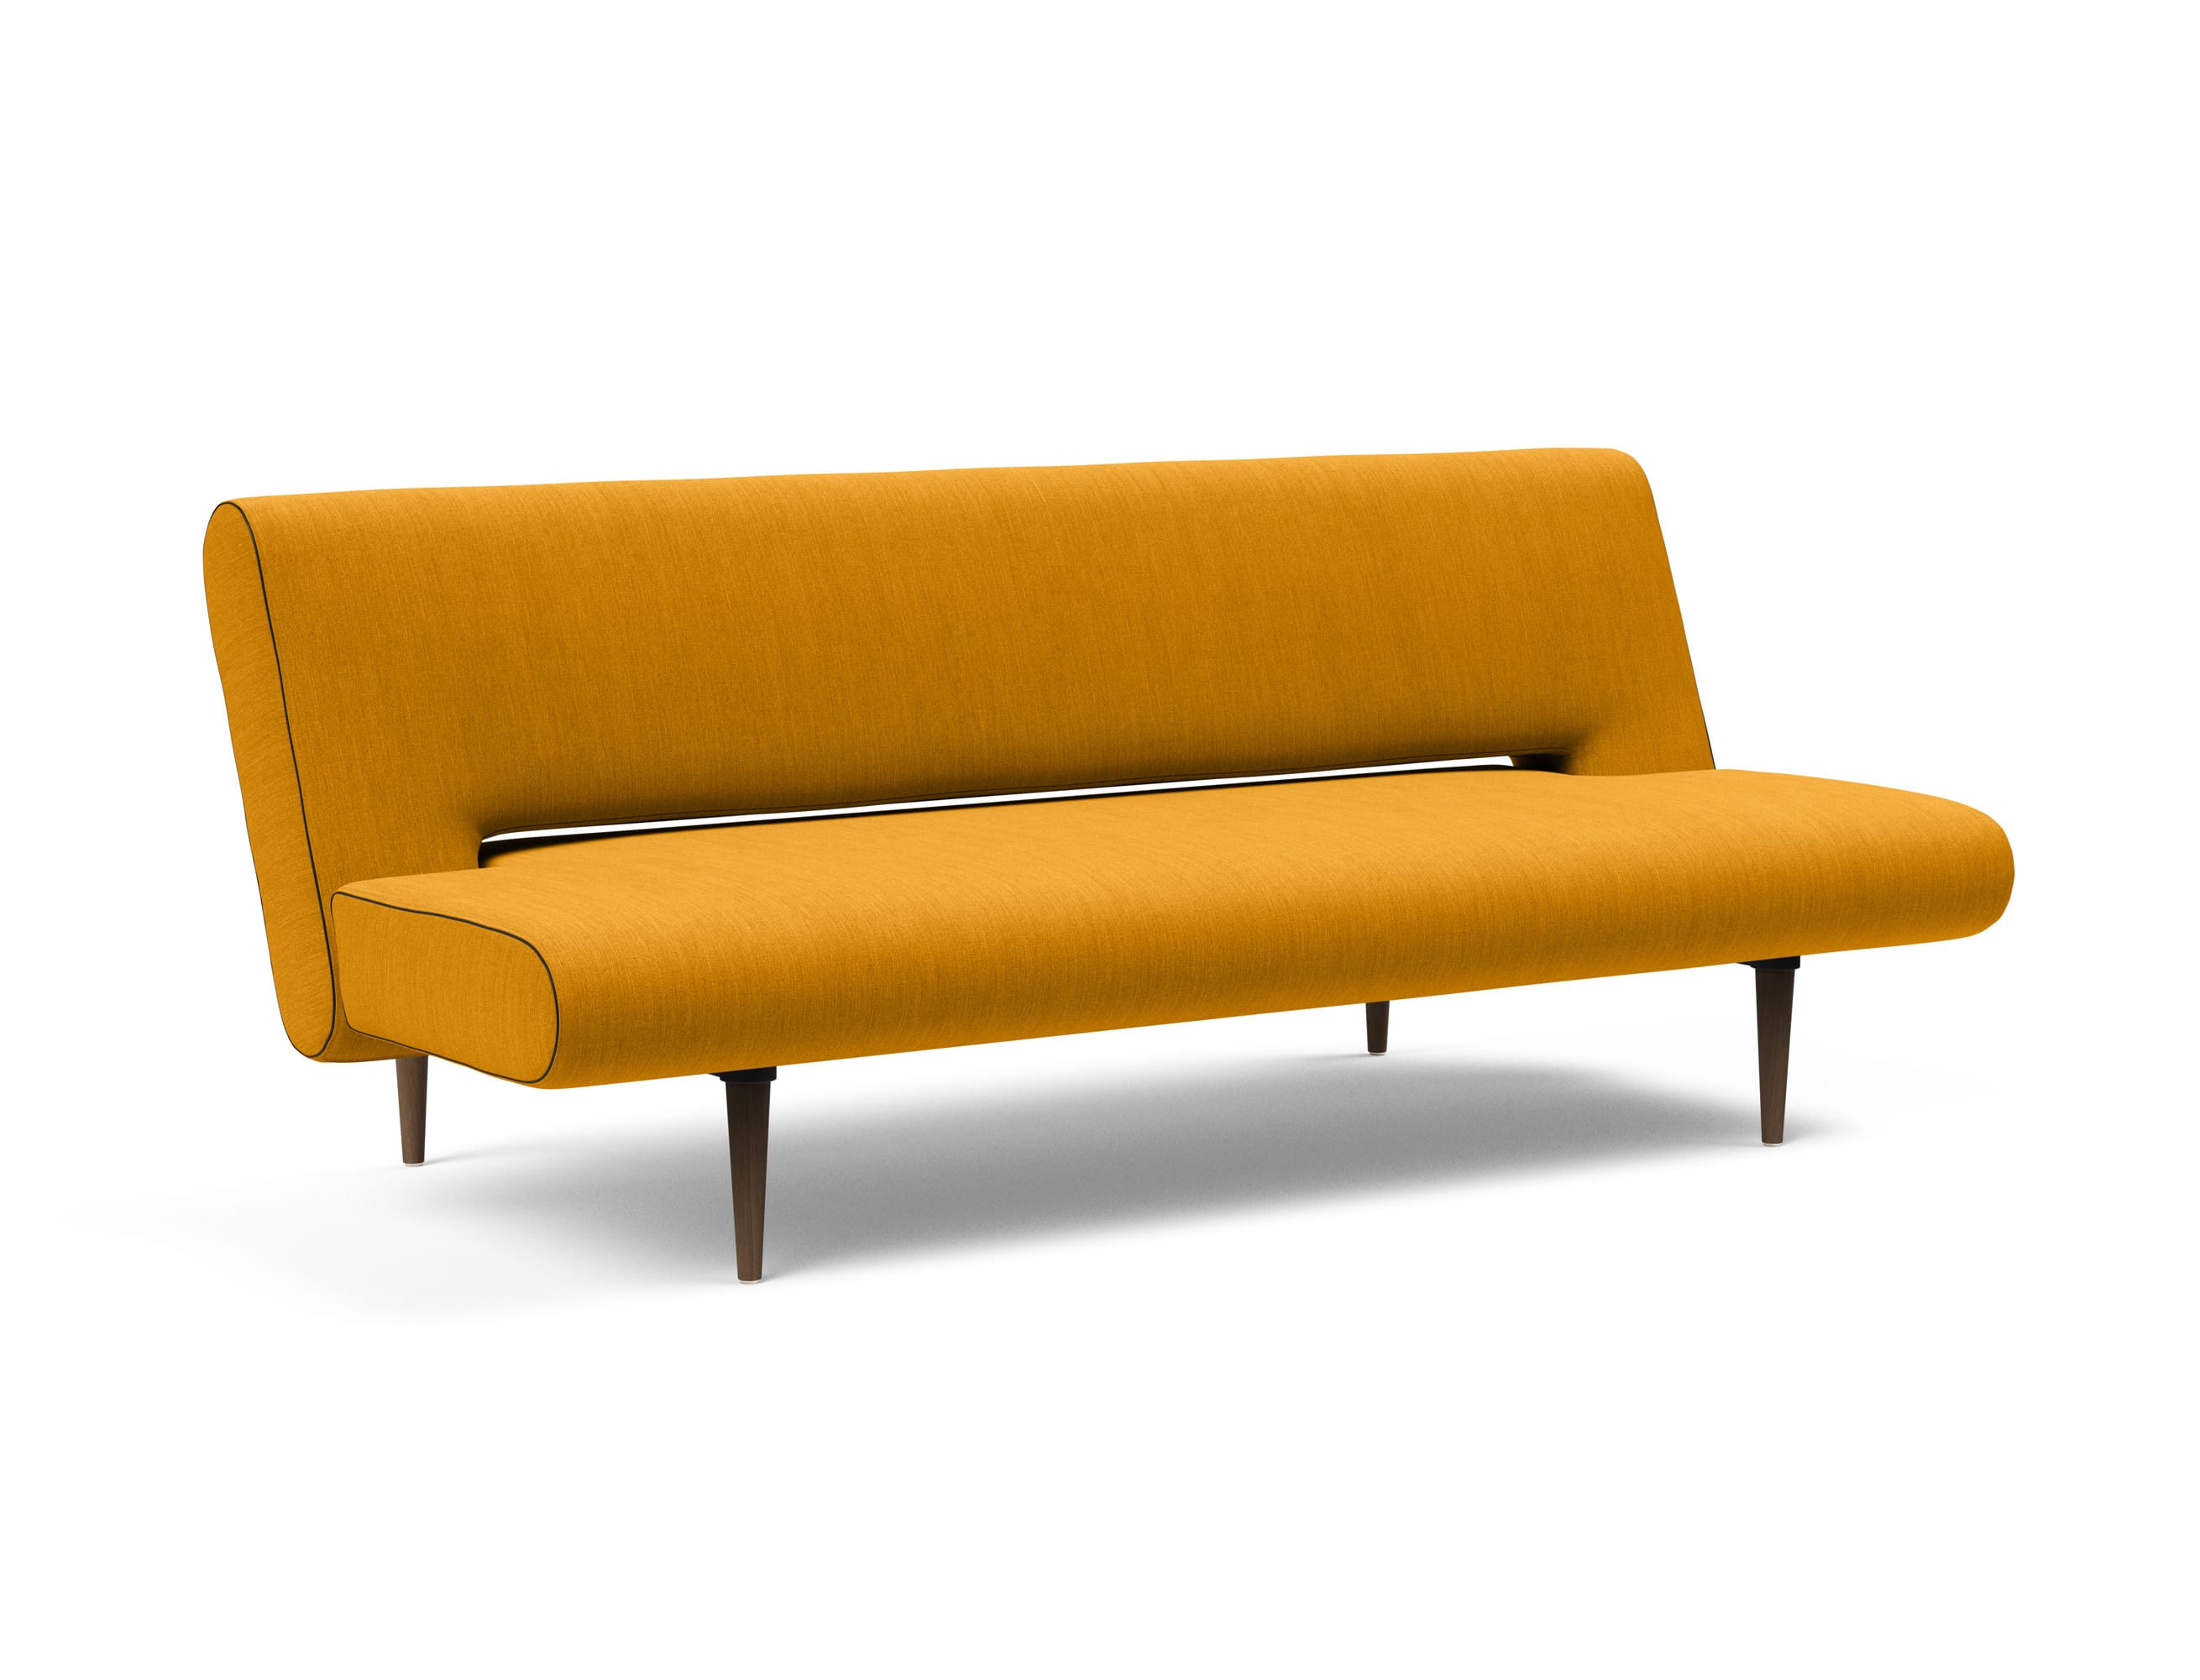 Unfurl Sofa Bed Elegance Burned Curry by Innovation